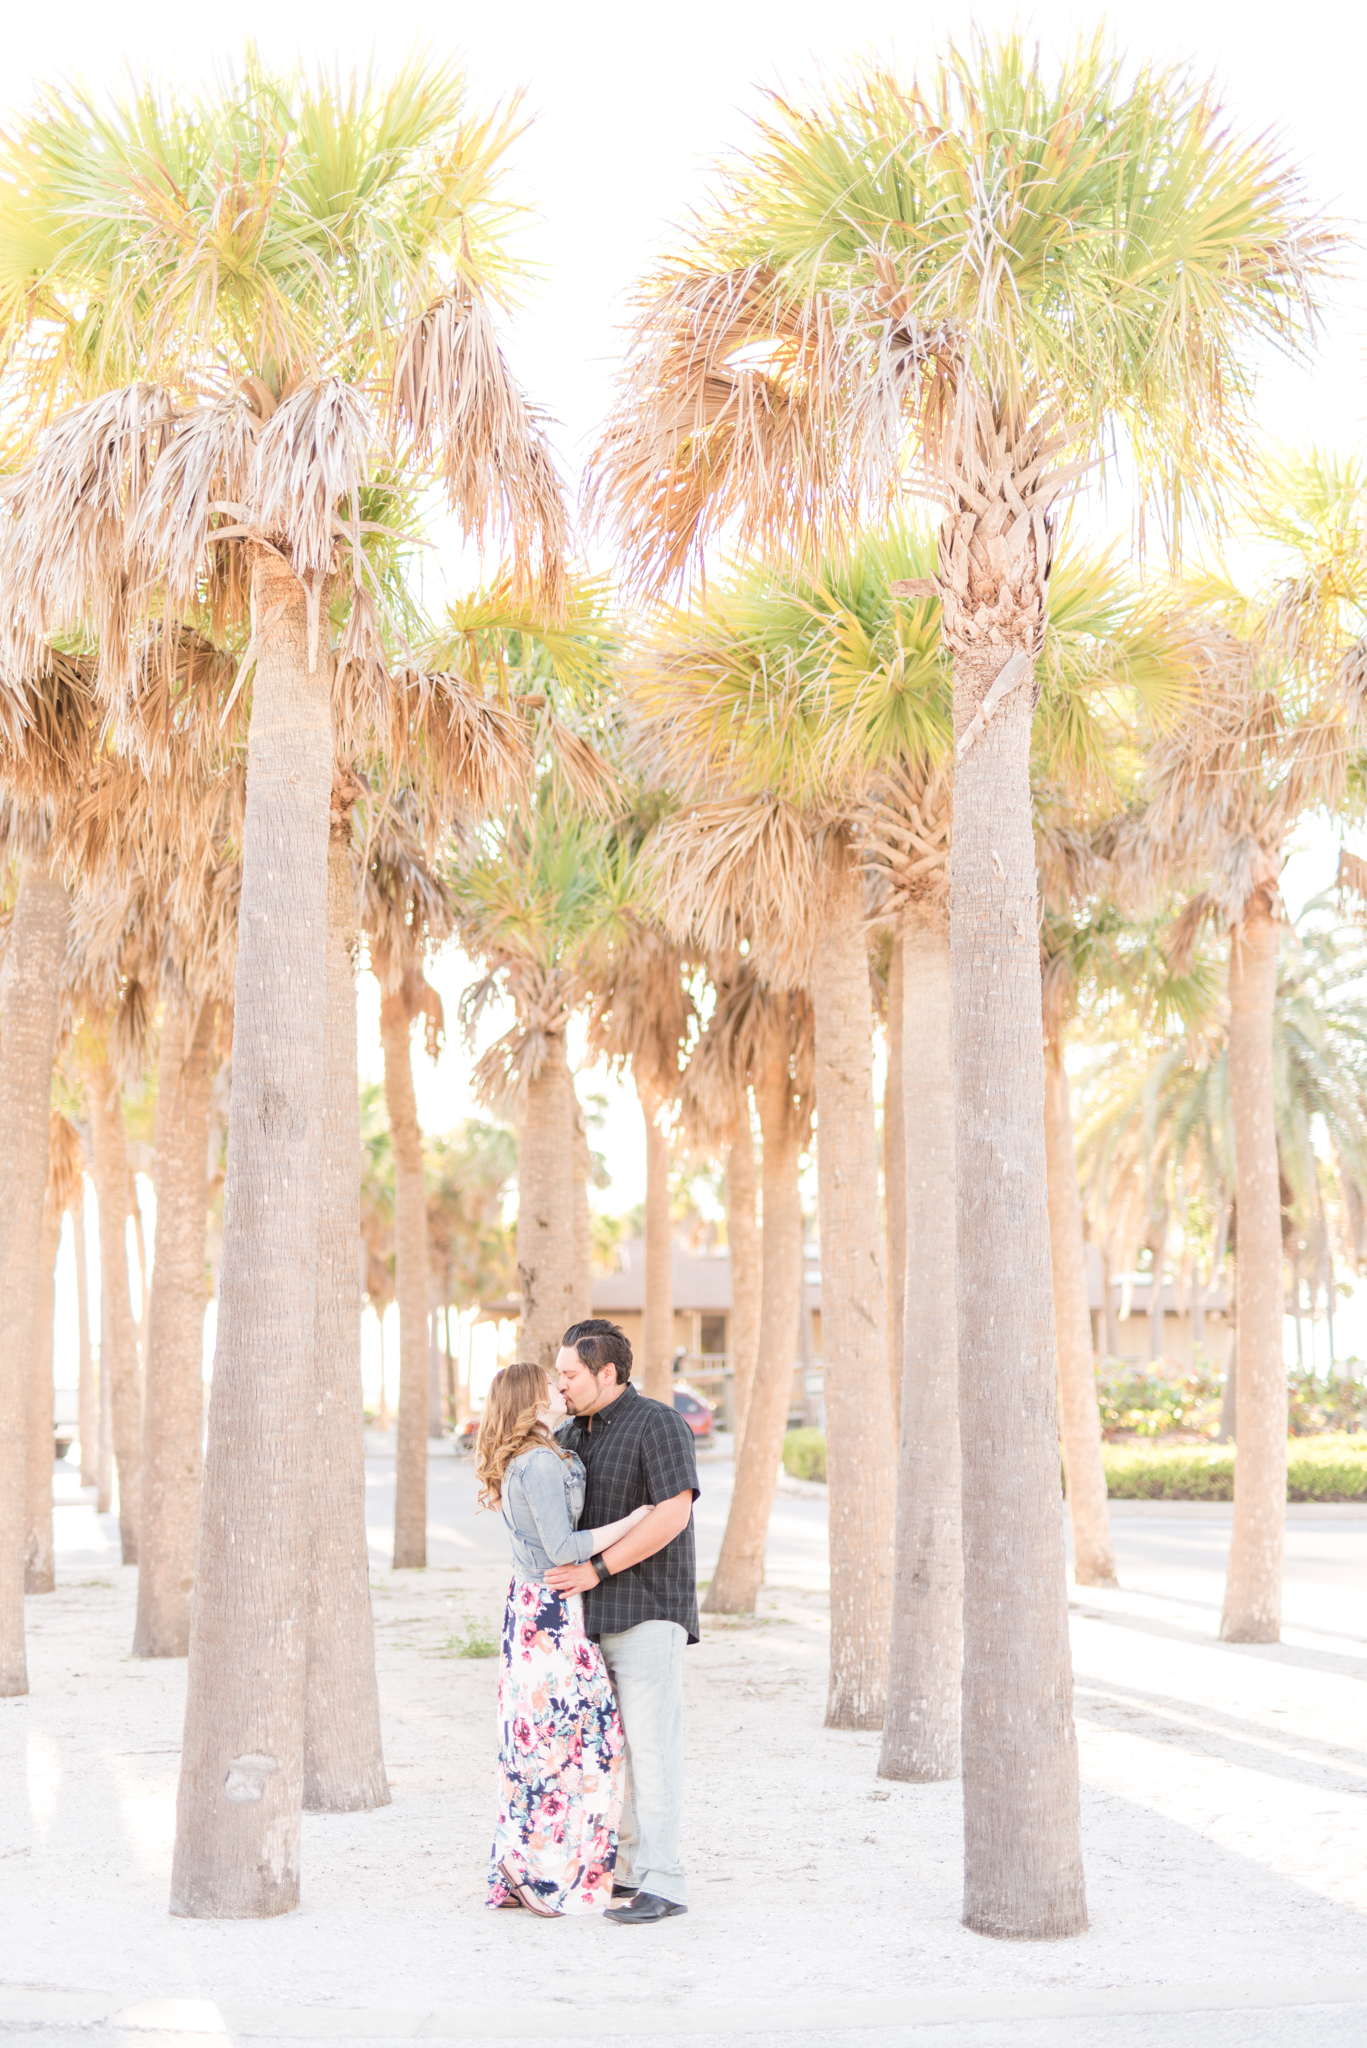 Couple kisses while surrounded by palm trees.